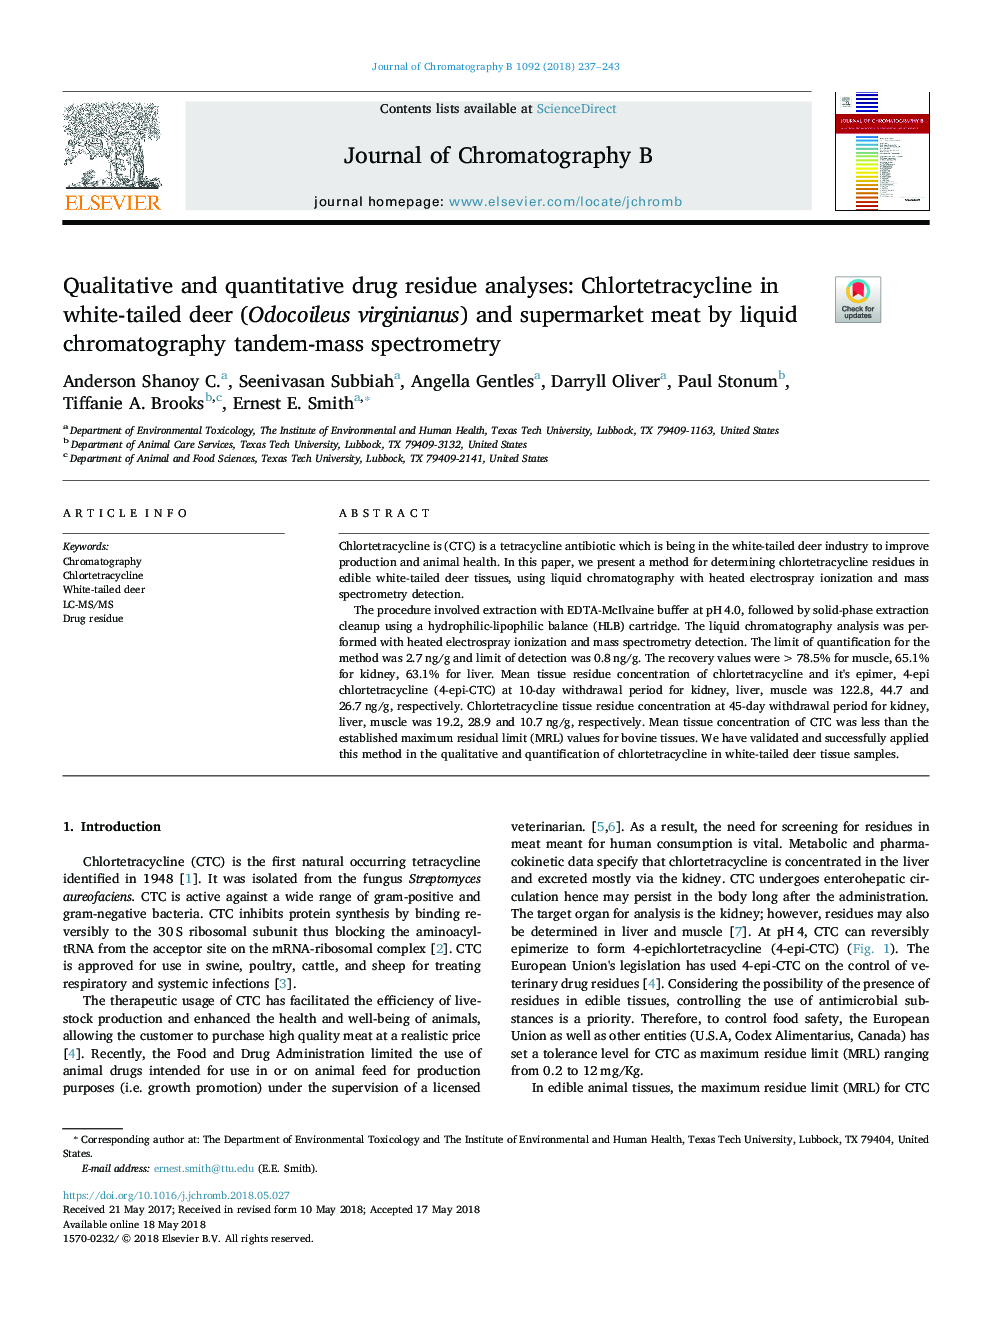 Qualitative and quantitative drug residue analyses: Chlortetracycline in white-tailed deer (Odocoileus virginianus) and supermarket meat by liquid chromatography tandem-mass spectrometry